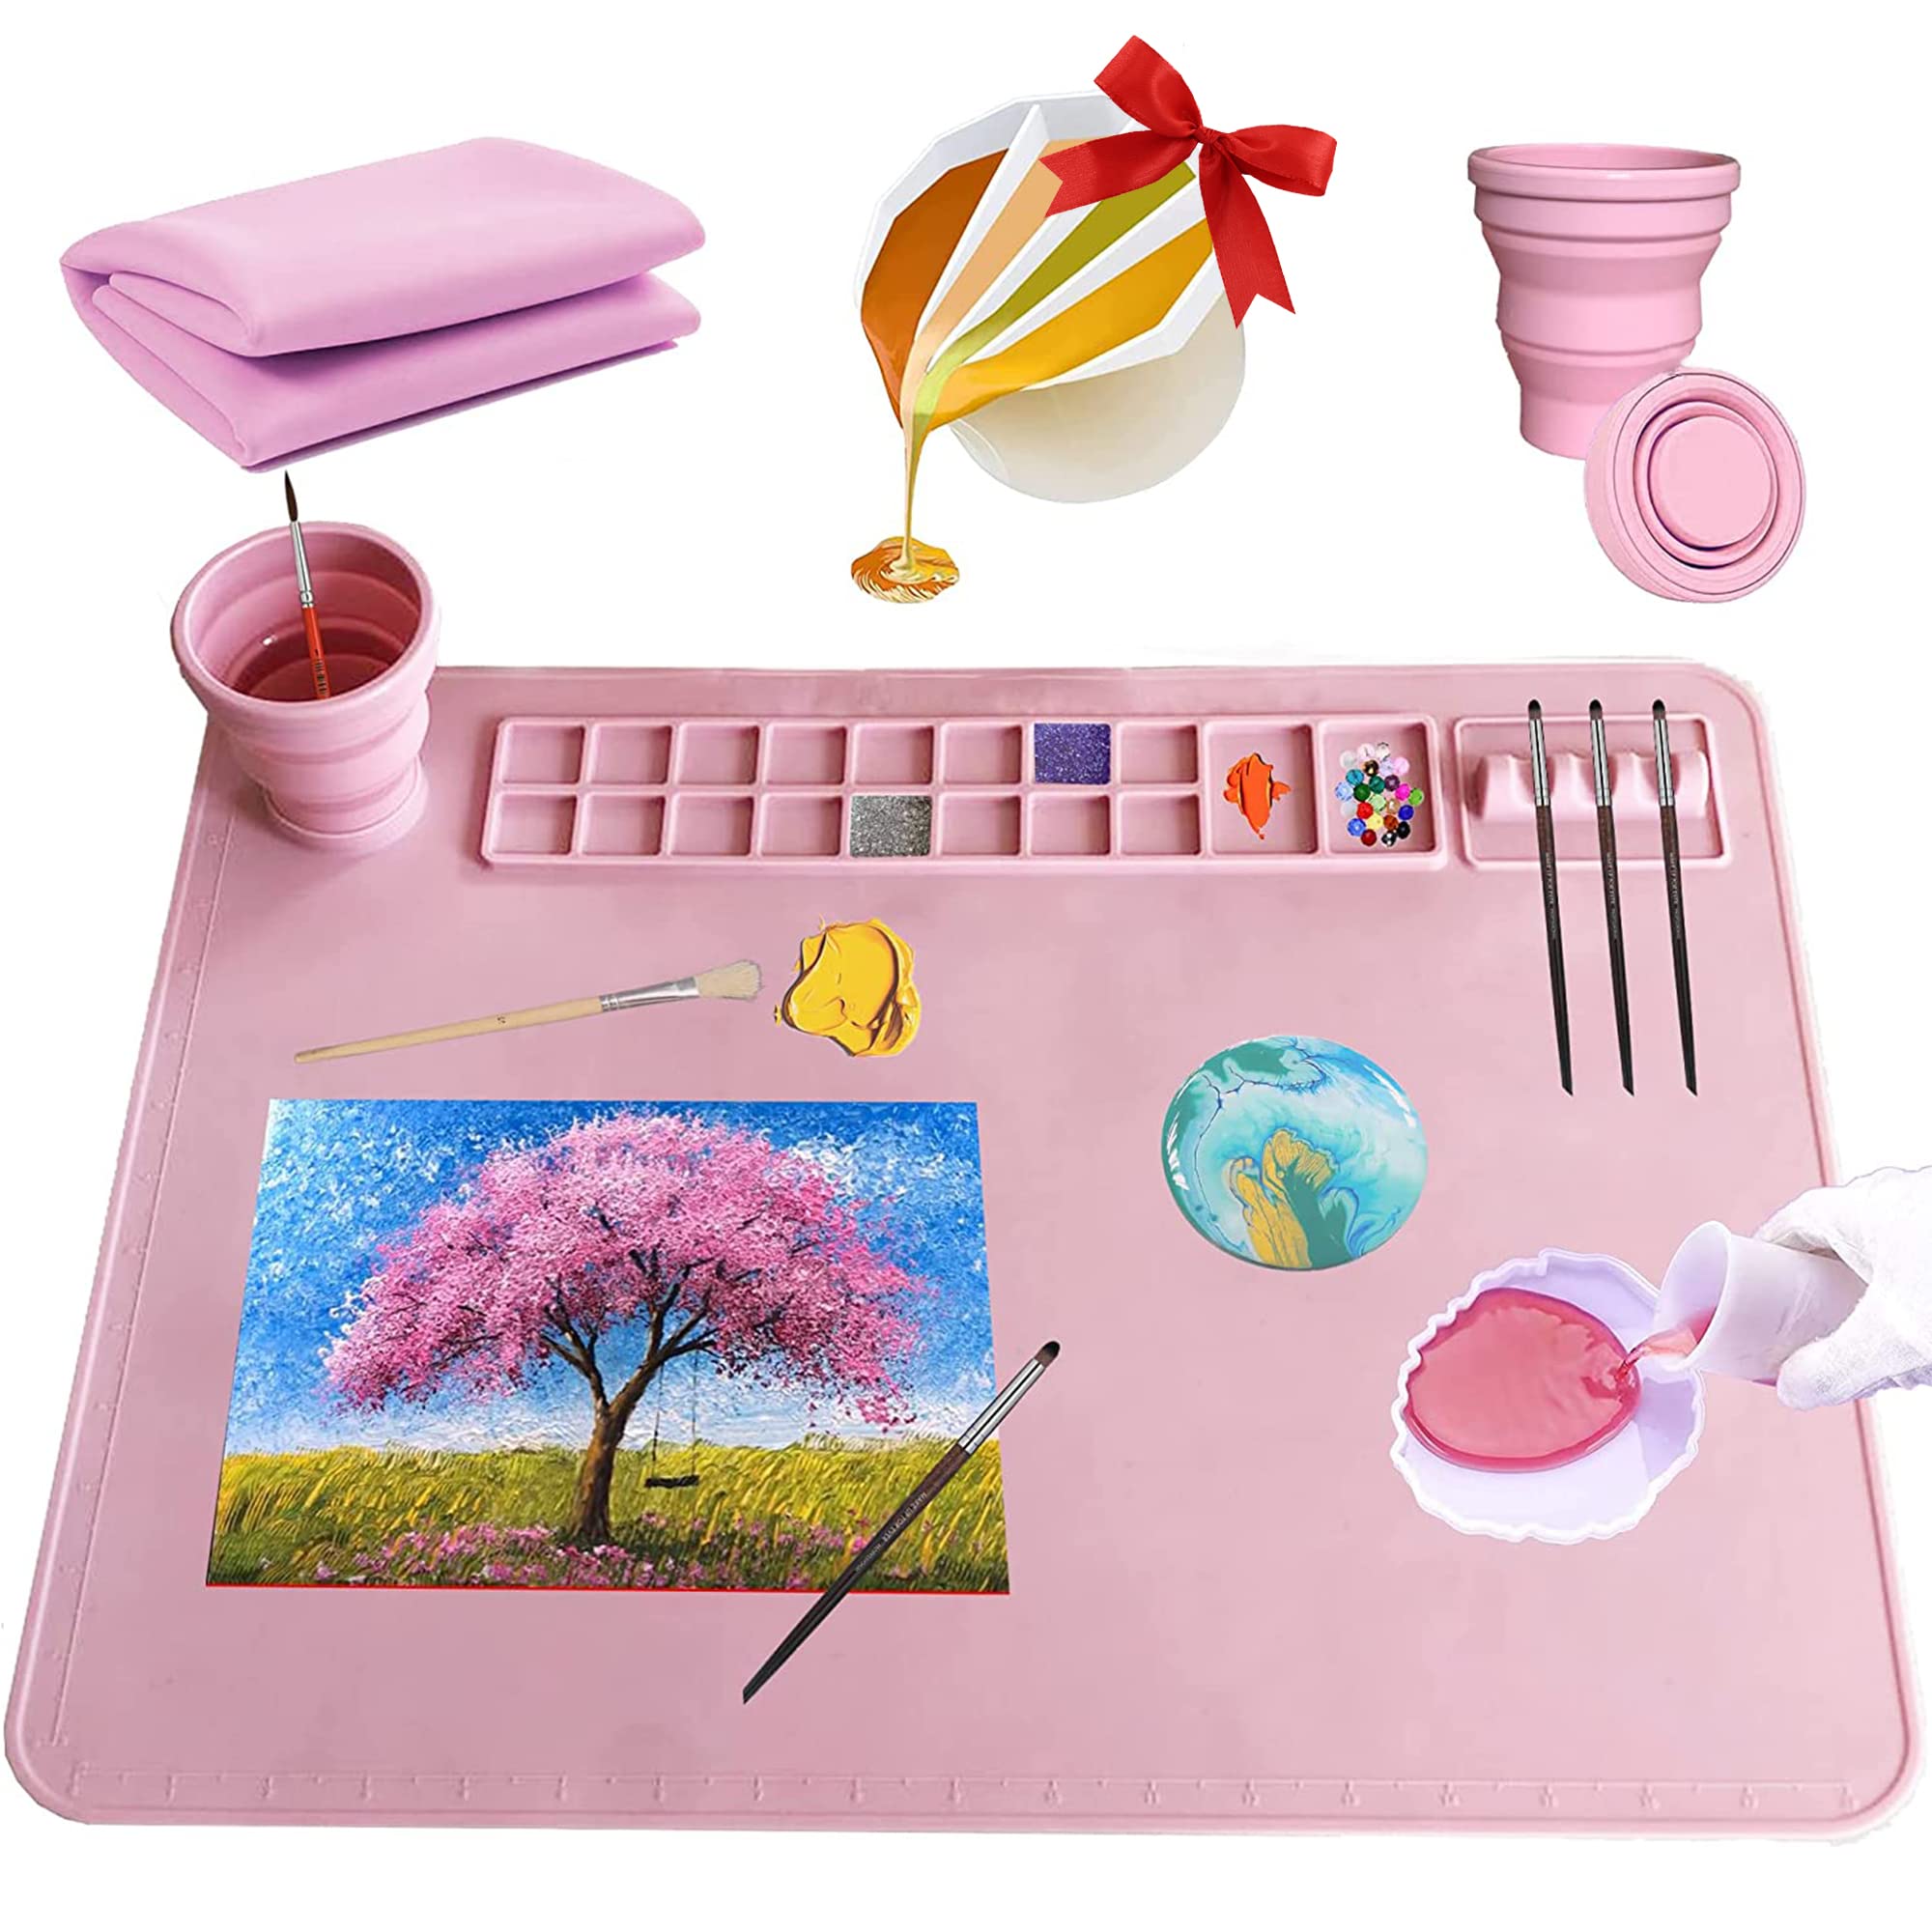 Silicone Painting Mat, 21x18 Inch Silicone Craft Mat for Resin Casting, Non  Stick Paint Mats for Kids Art Mat with Cup and 12 Paint Dividers, for Art